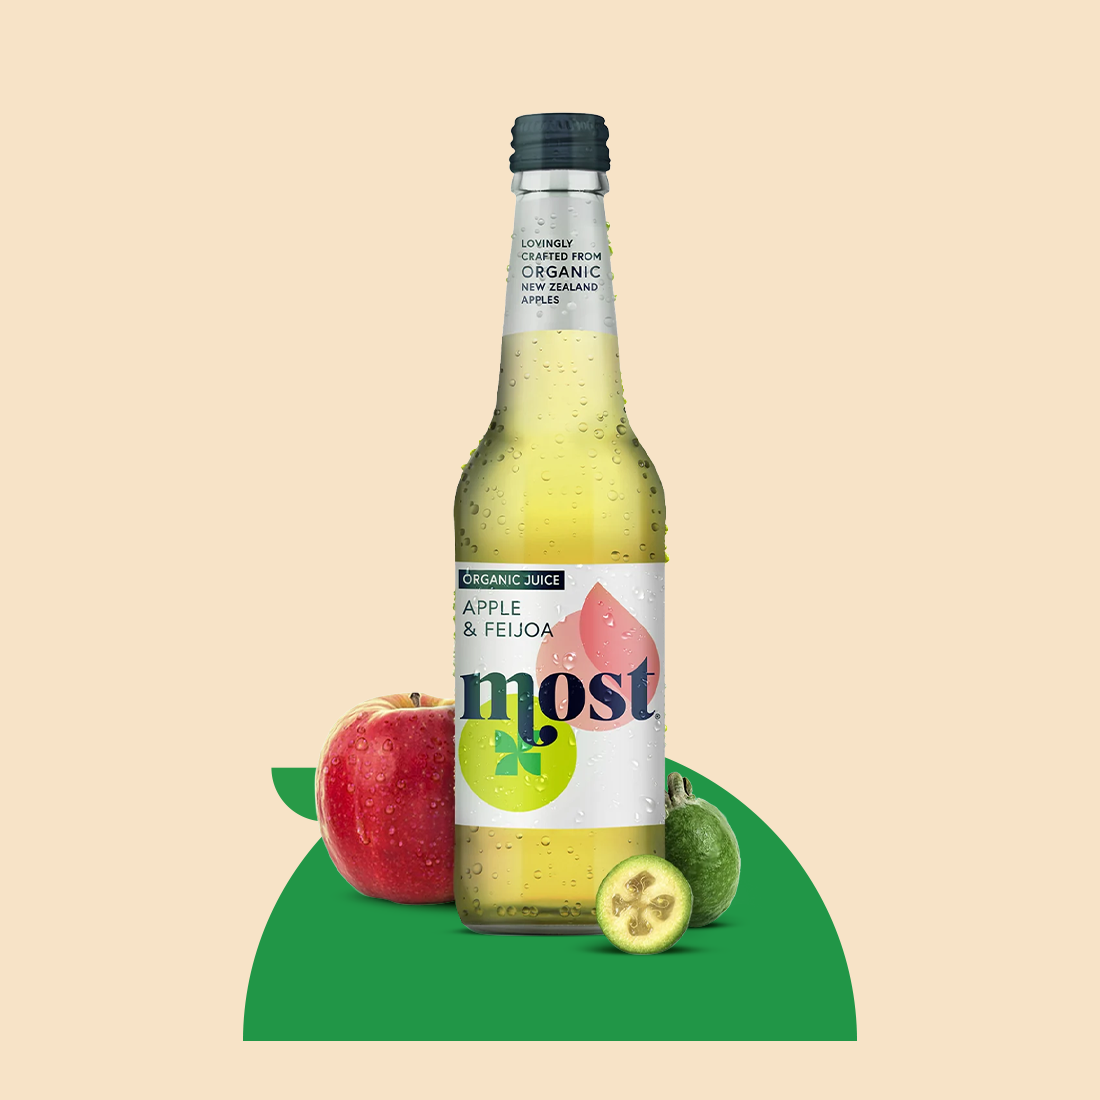 MOST Apple and Feijoa Organic Juice bottle